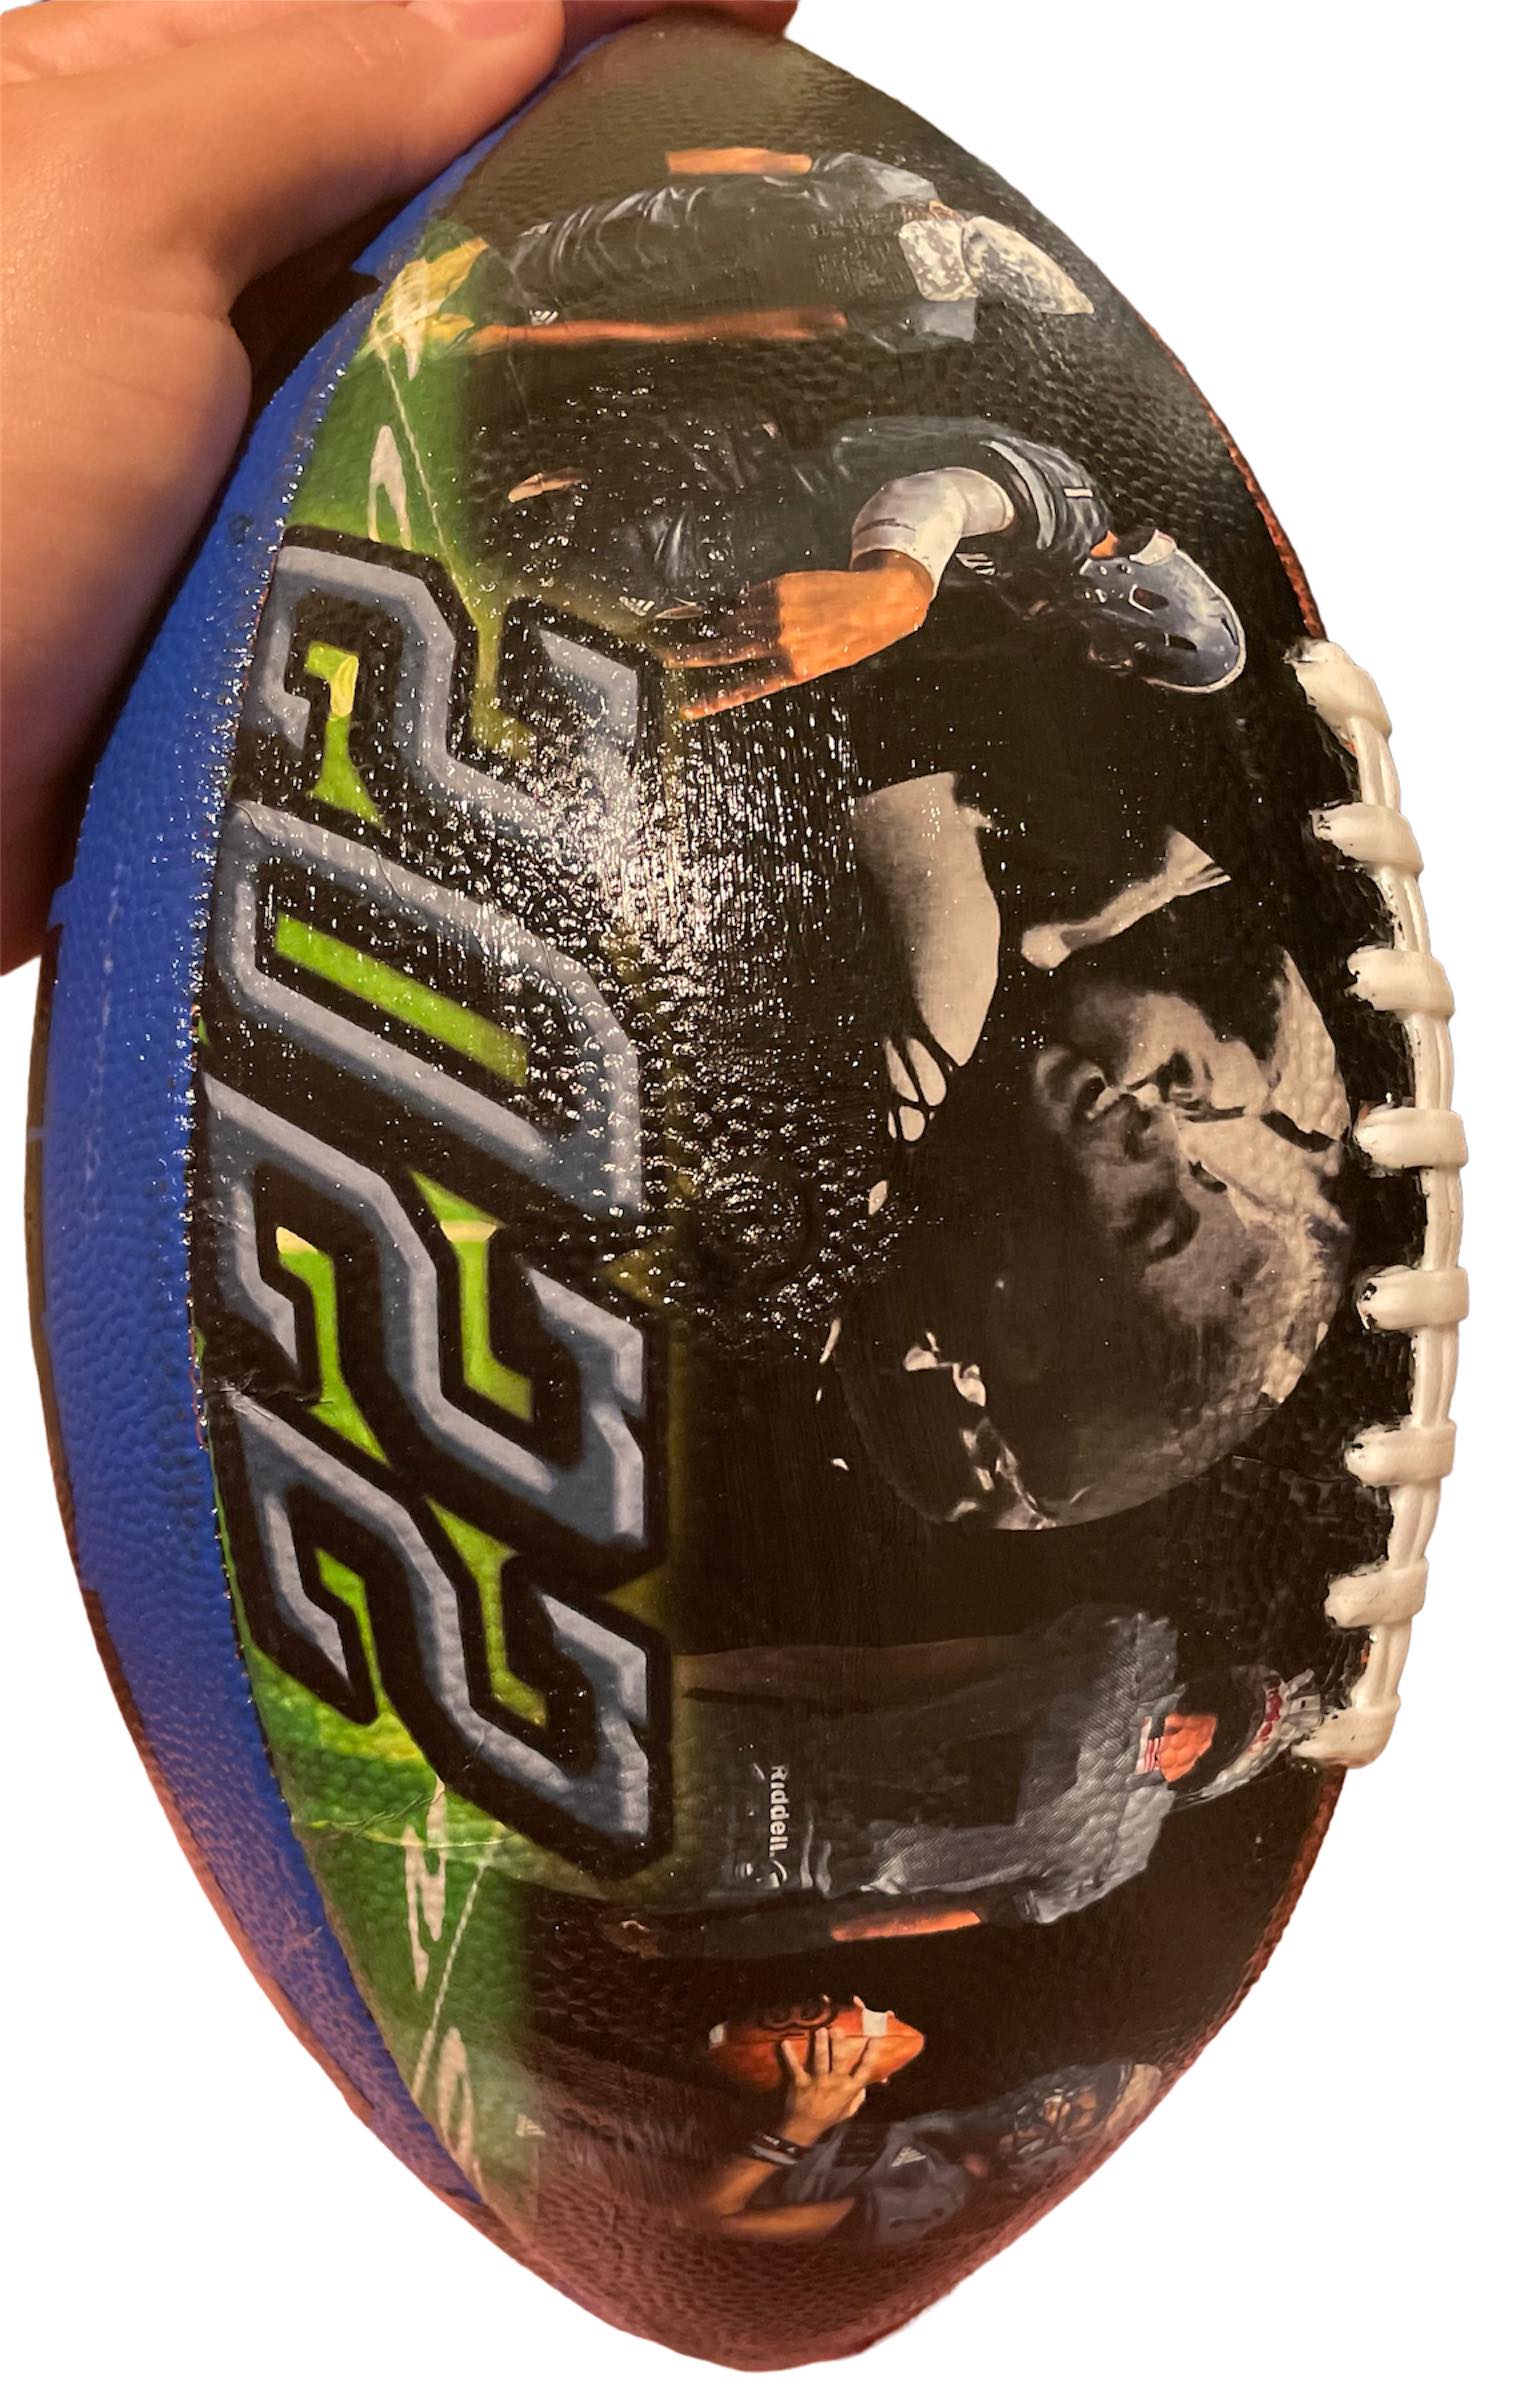 Personalize Your Football